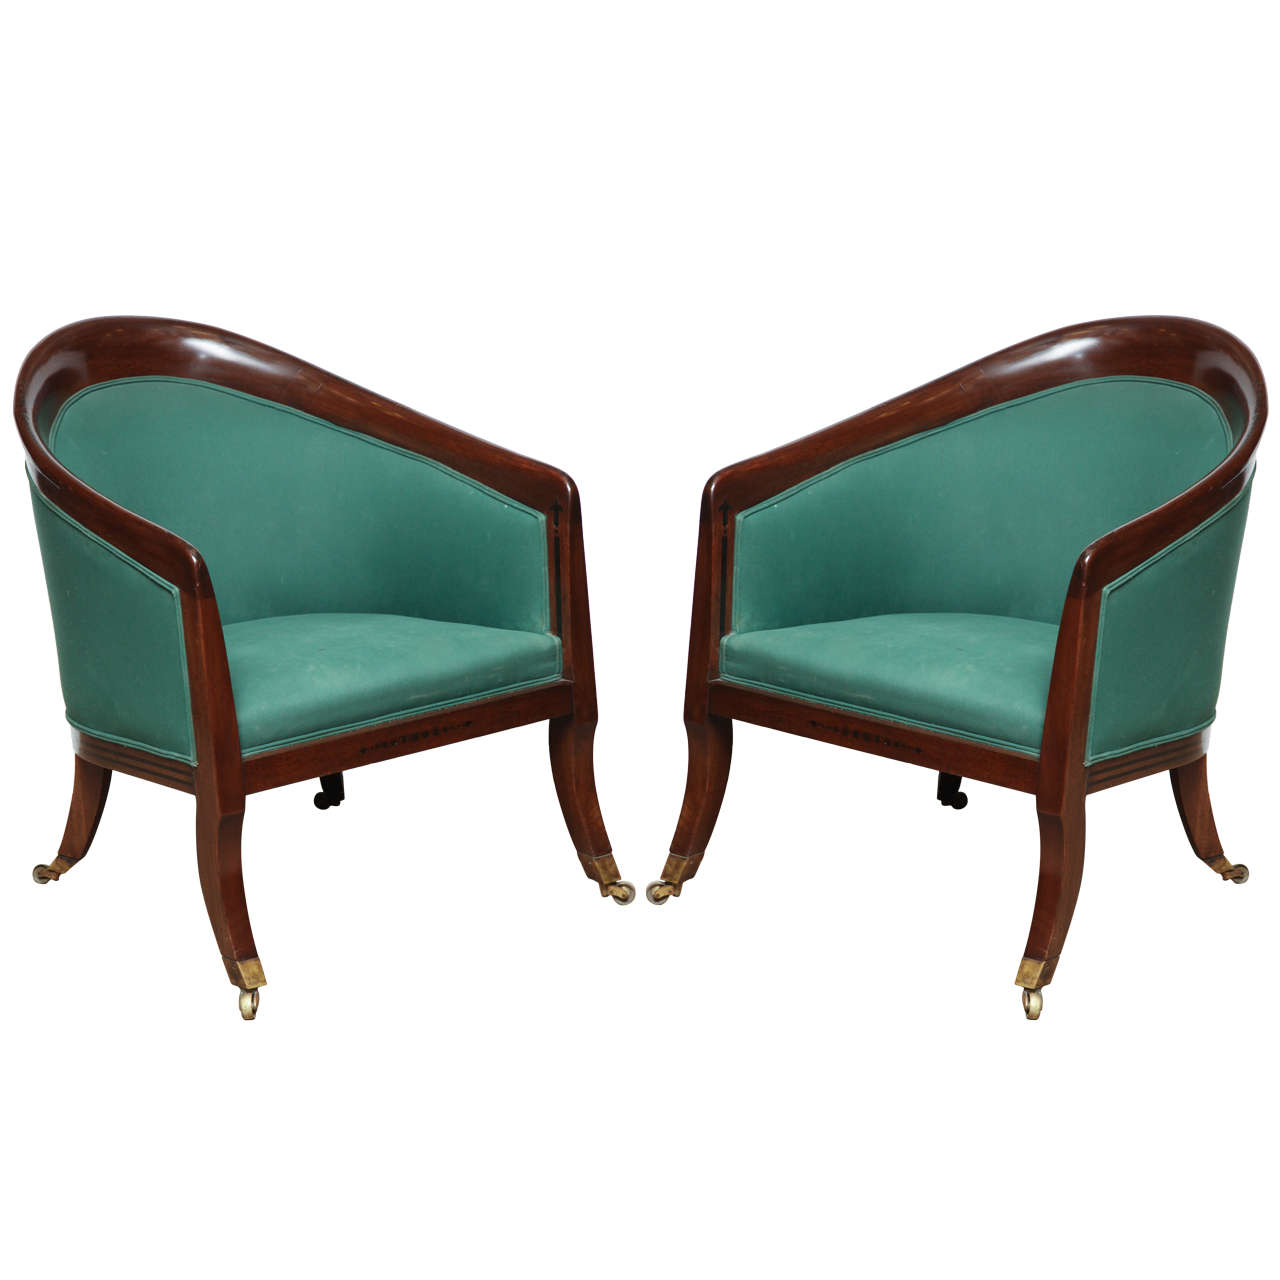 Superb Pair of Early 19th Century English Armchairs